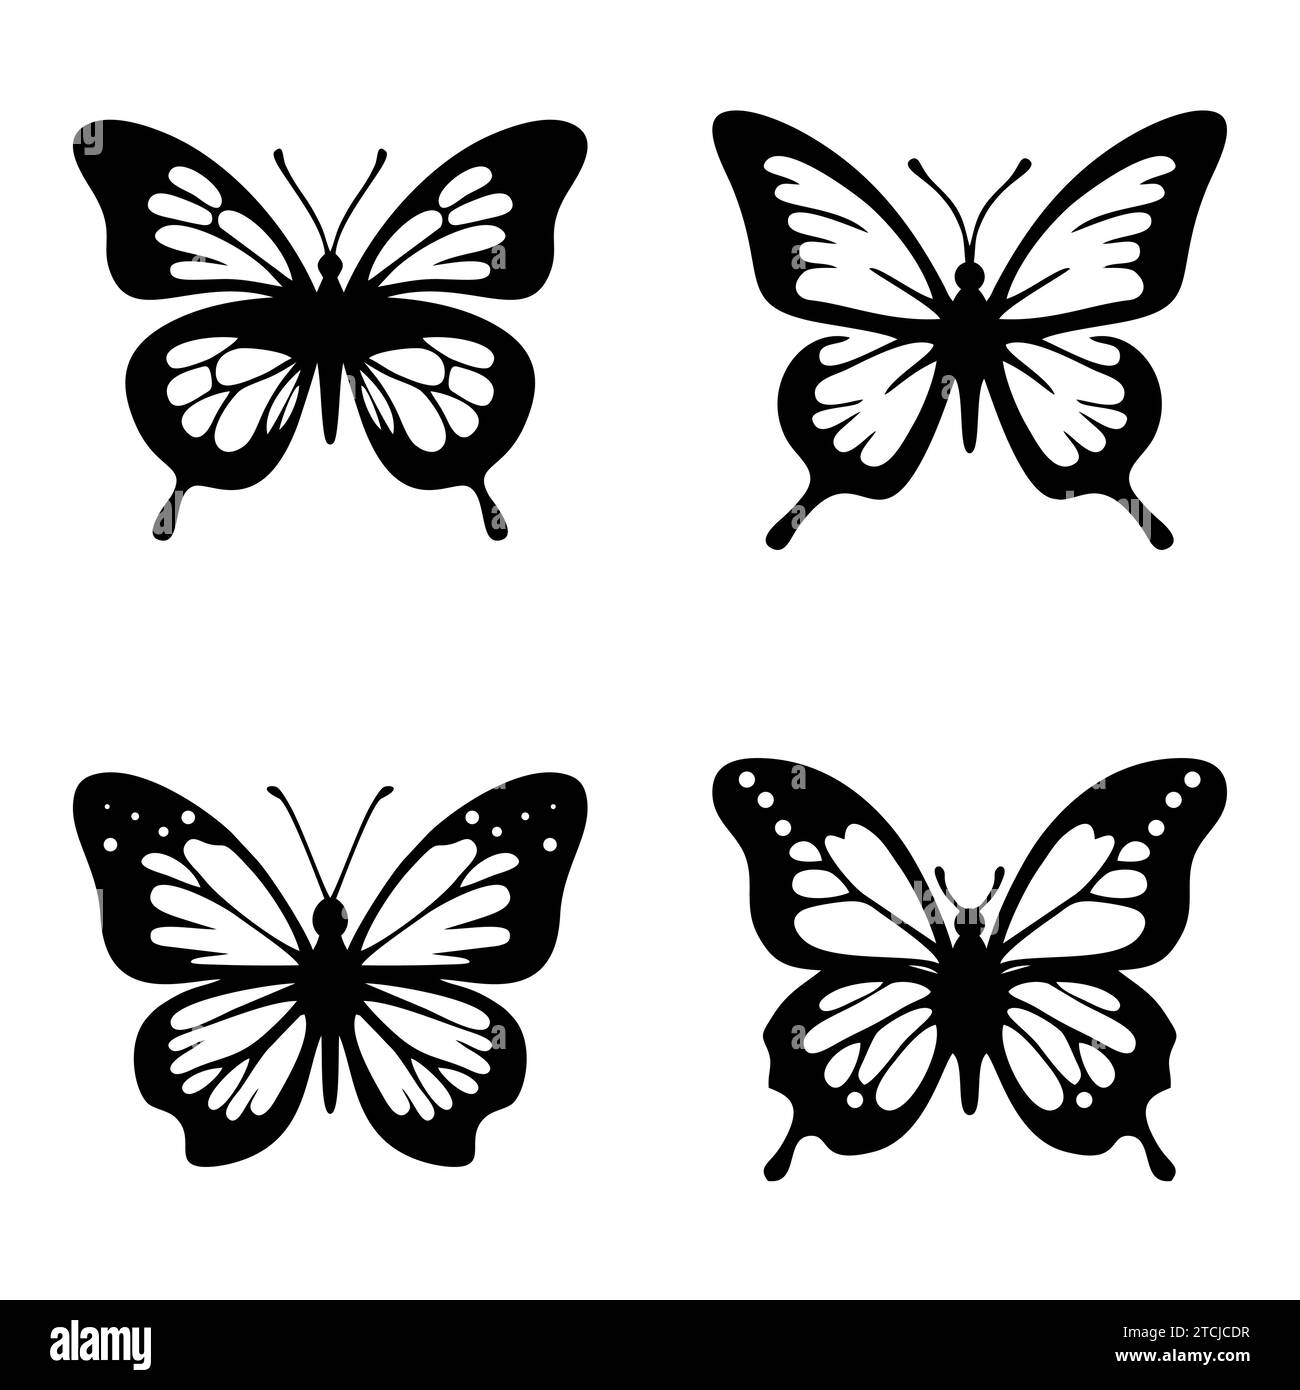 Monarch butterflies Black and White Stock Photos & Images - Page 2 - Alamy